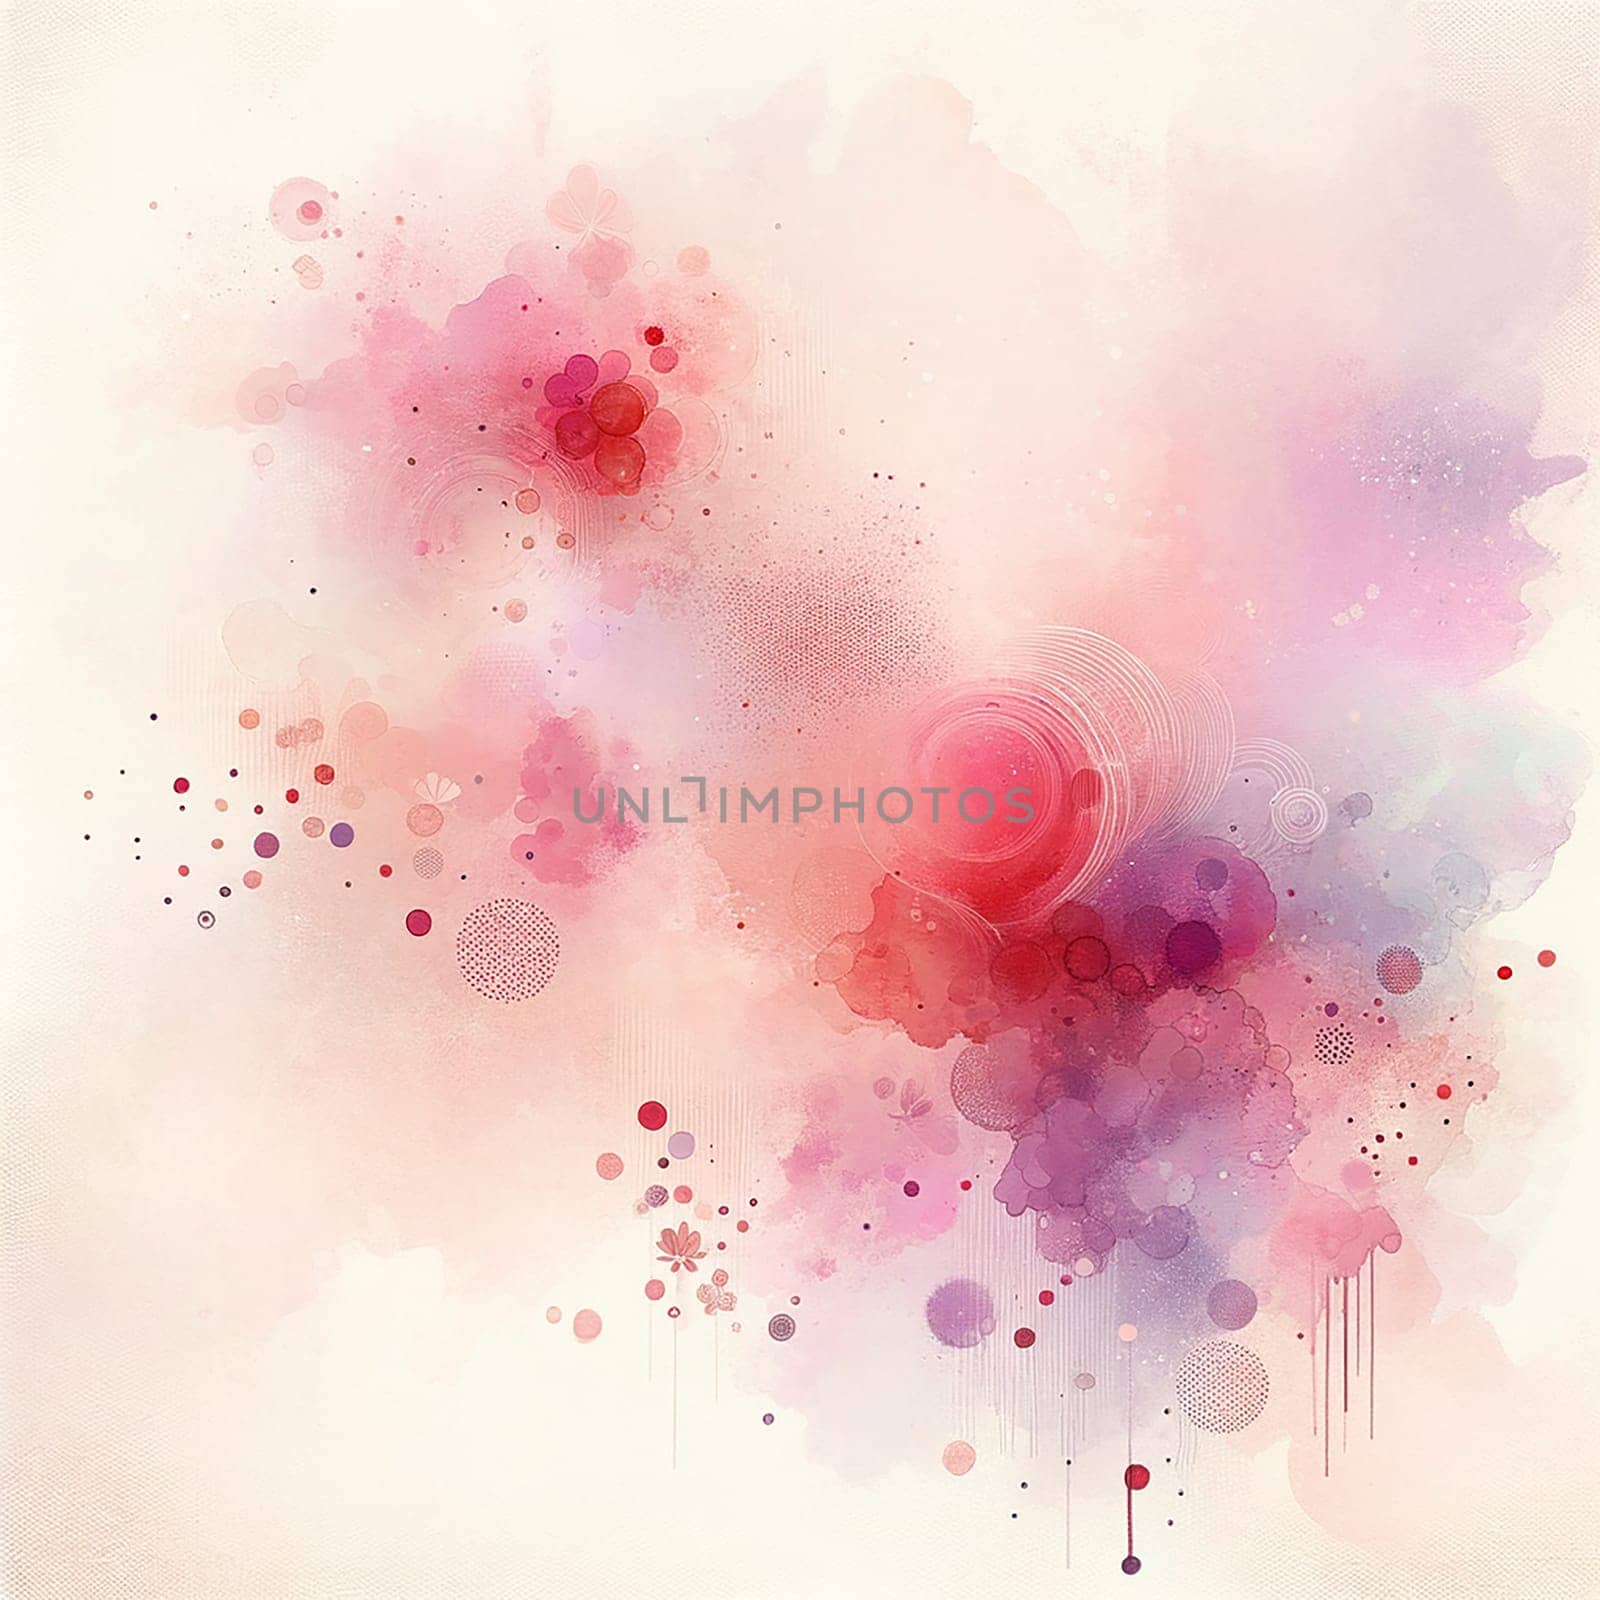 Sophisticated Serenity: Delicate Watercolor Pattern by Petrichor